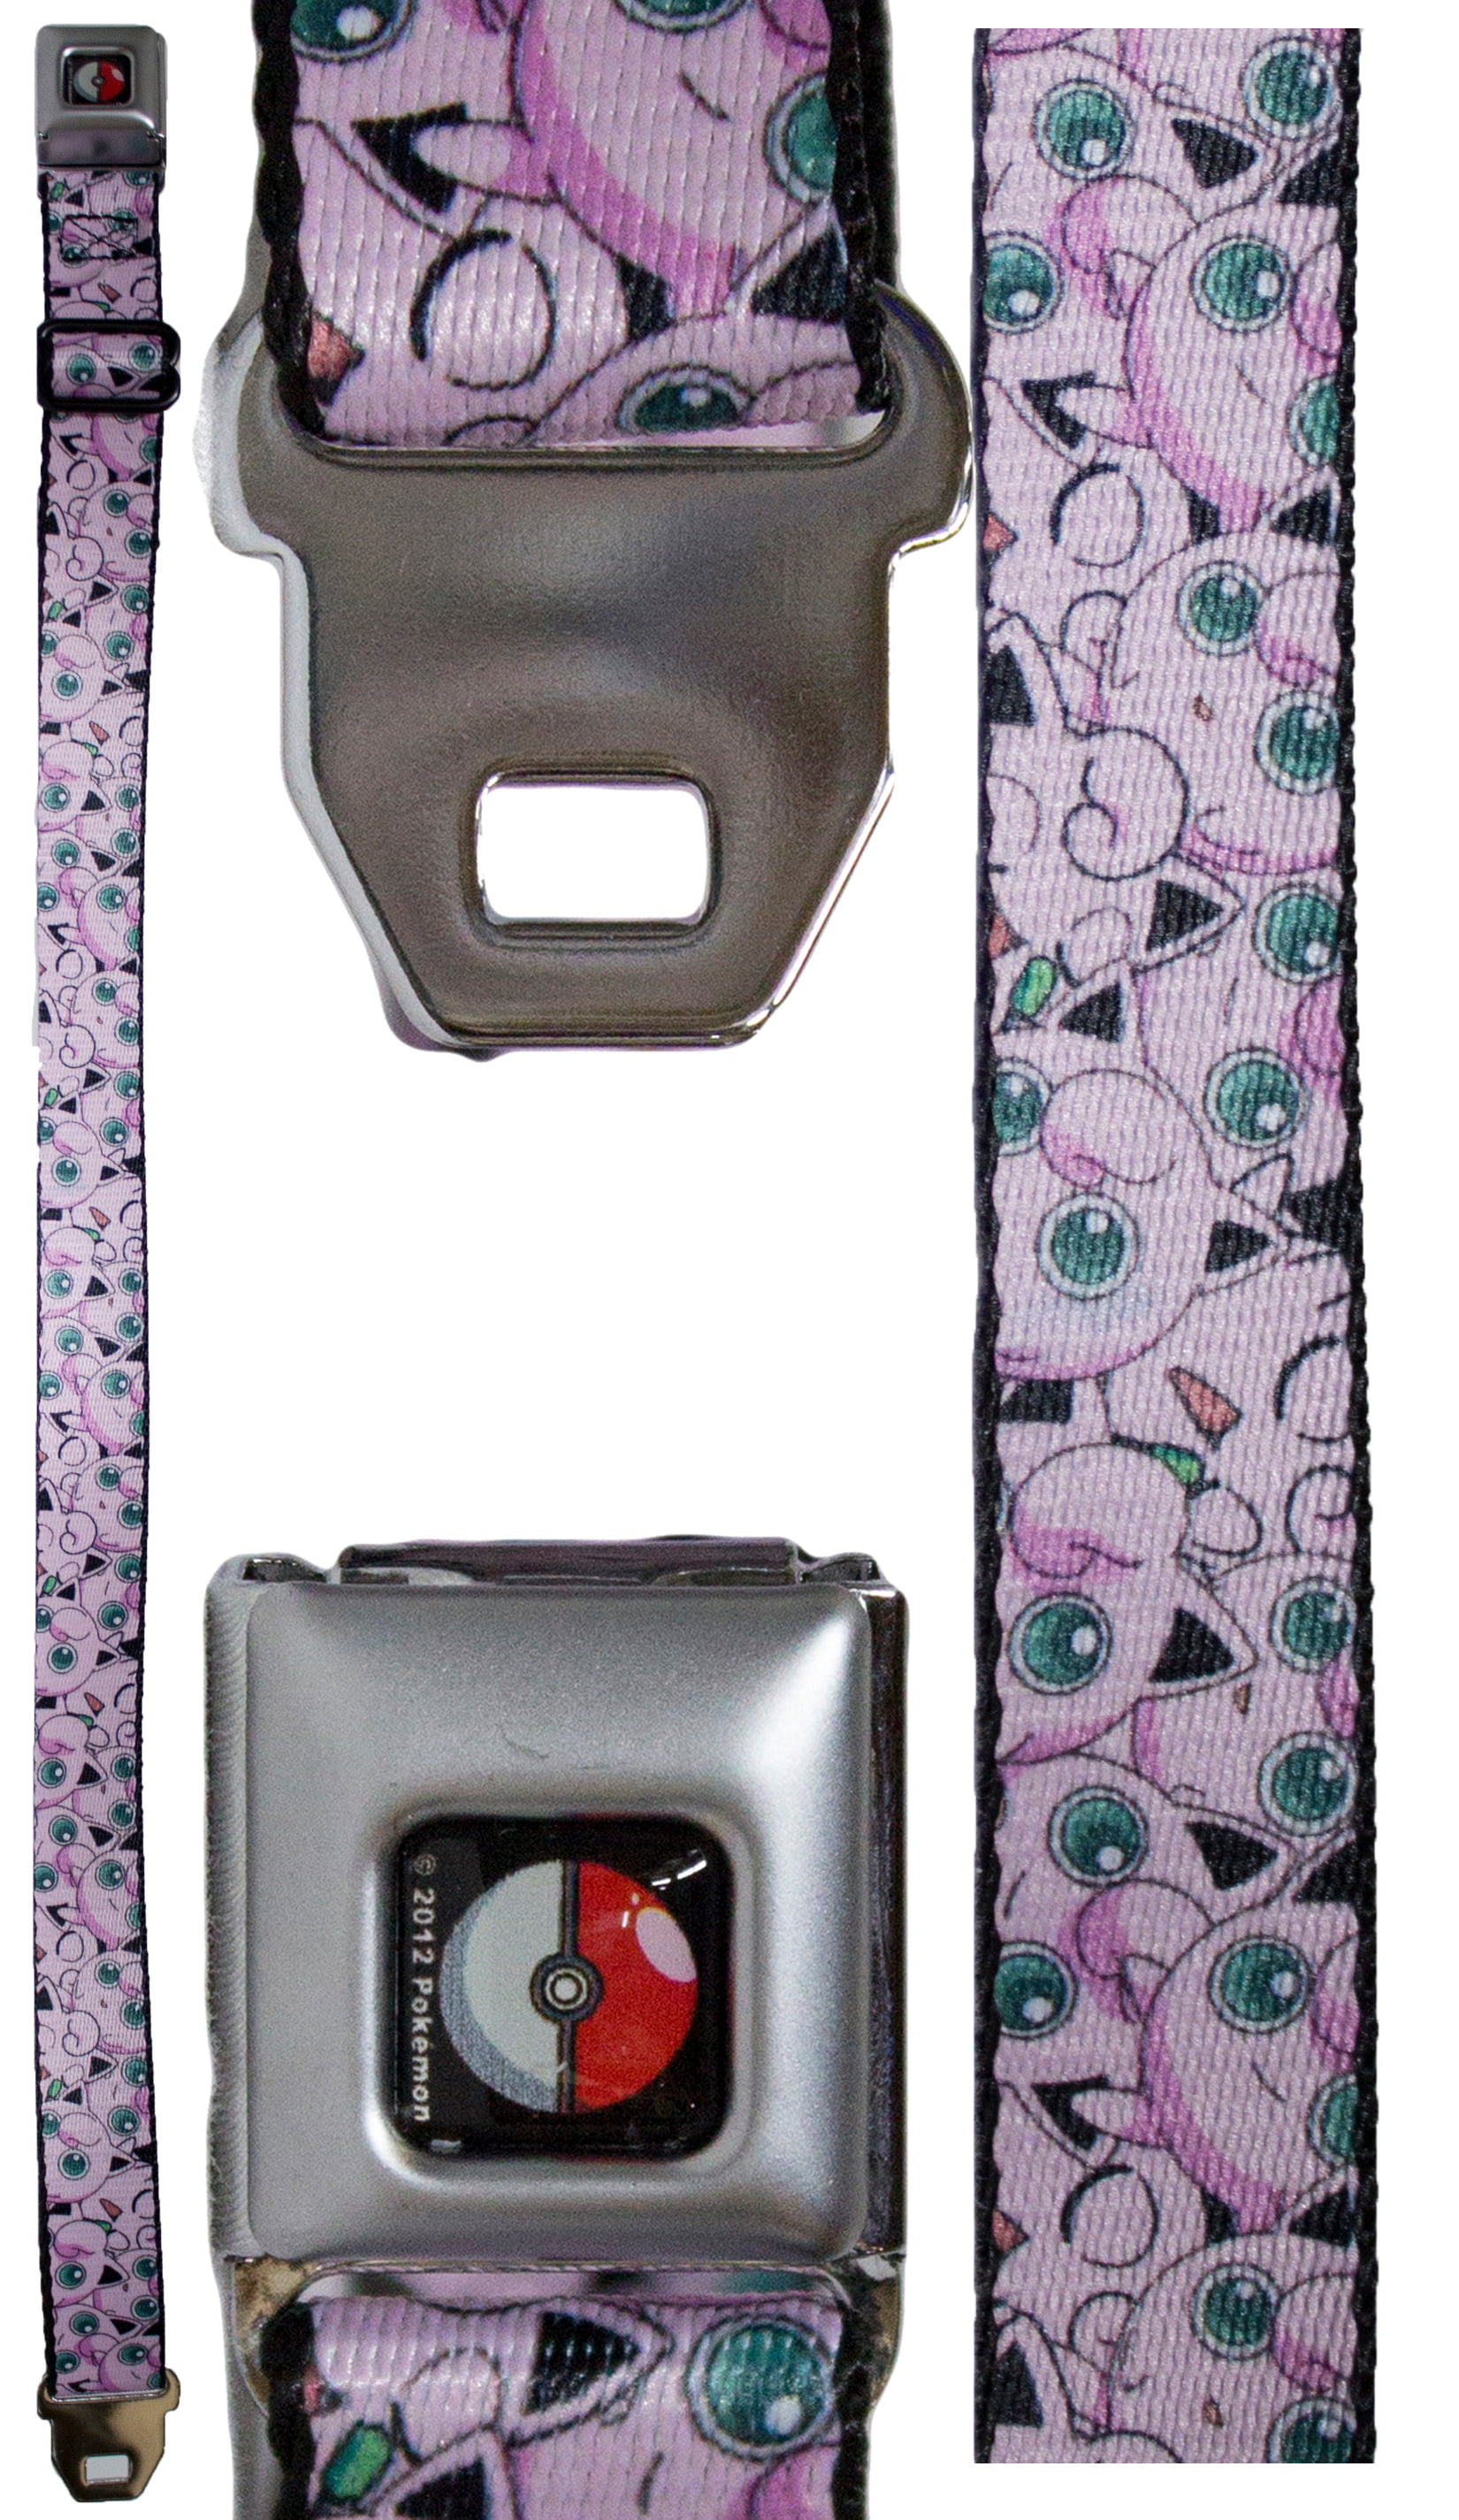 20-36 Inches in Length Jigglypuff Stacked 1.0 Wide Buckle-Down Seatbelt Belt